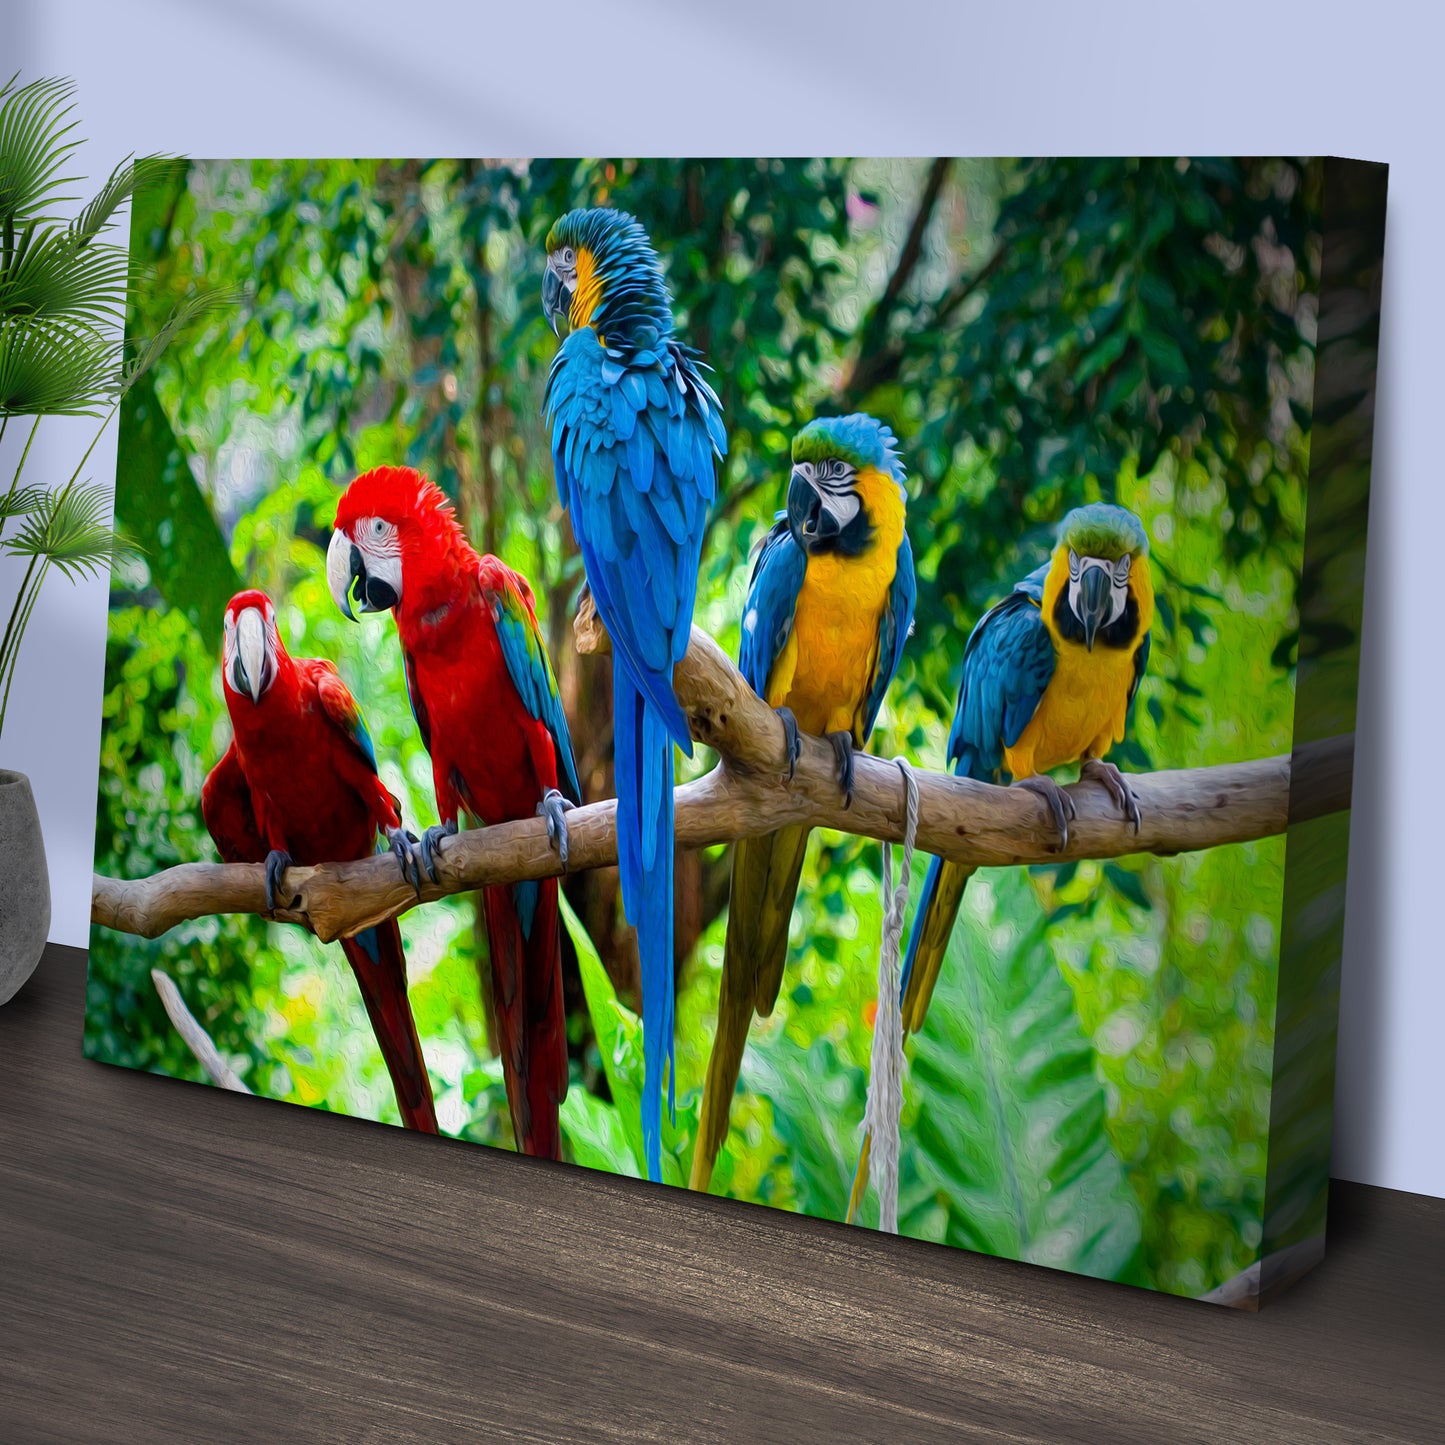 Colorful Parrots On Tree Branch Canvas Wall Art Style 2 - Image by Tailored Canvases